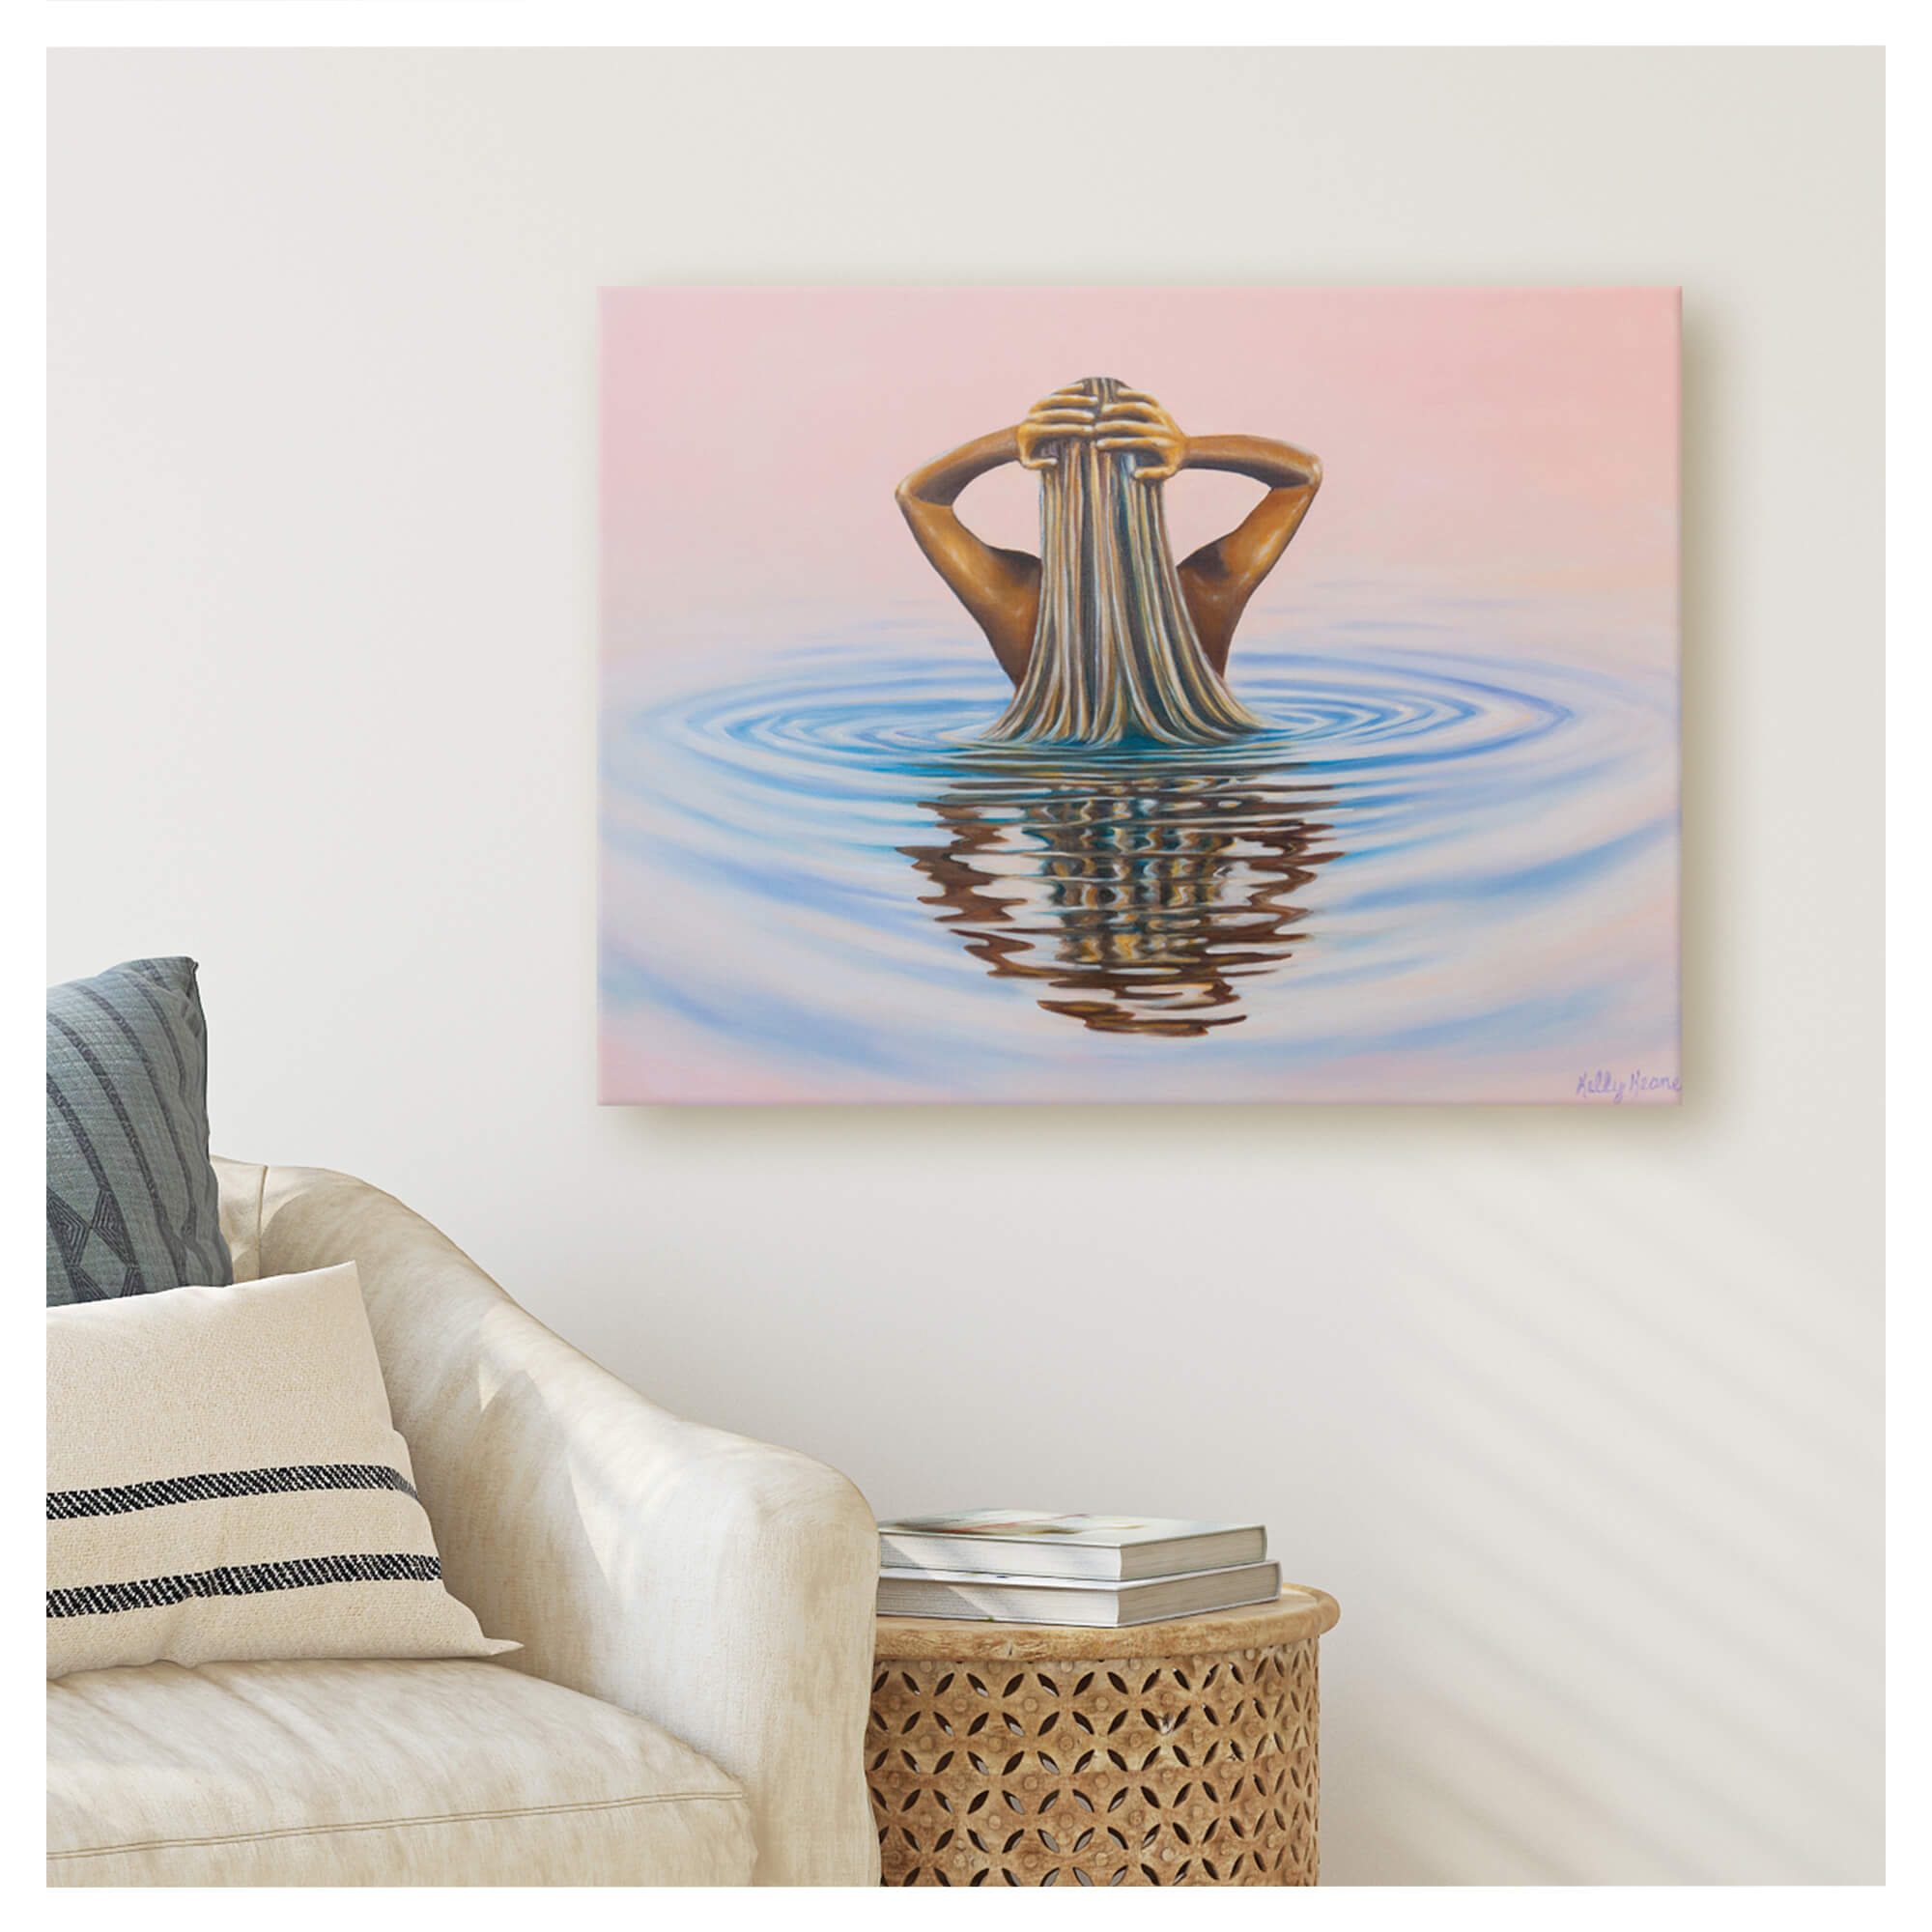 Canvas art print of a woman in the water with pastel colored background by Hawaii artist Kelly Keane